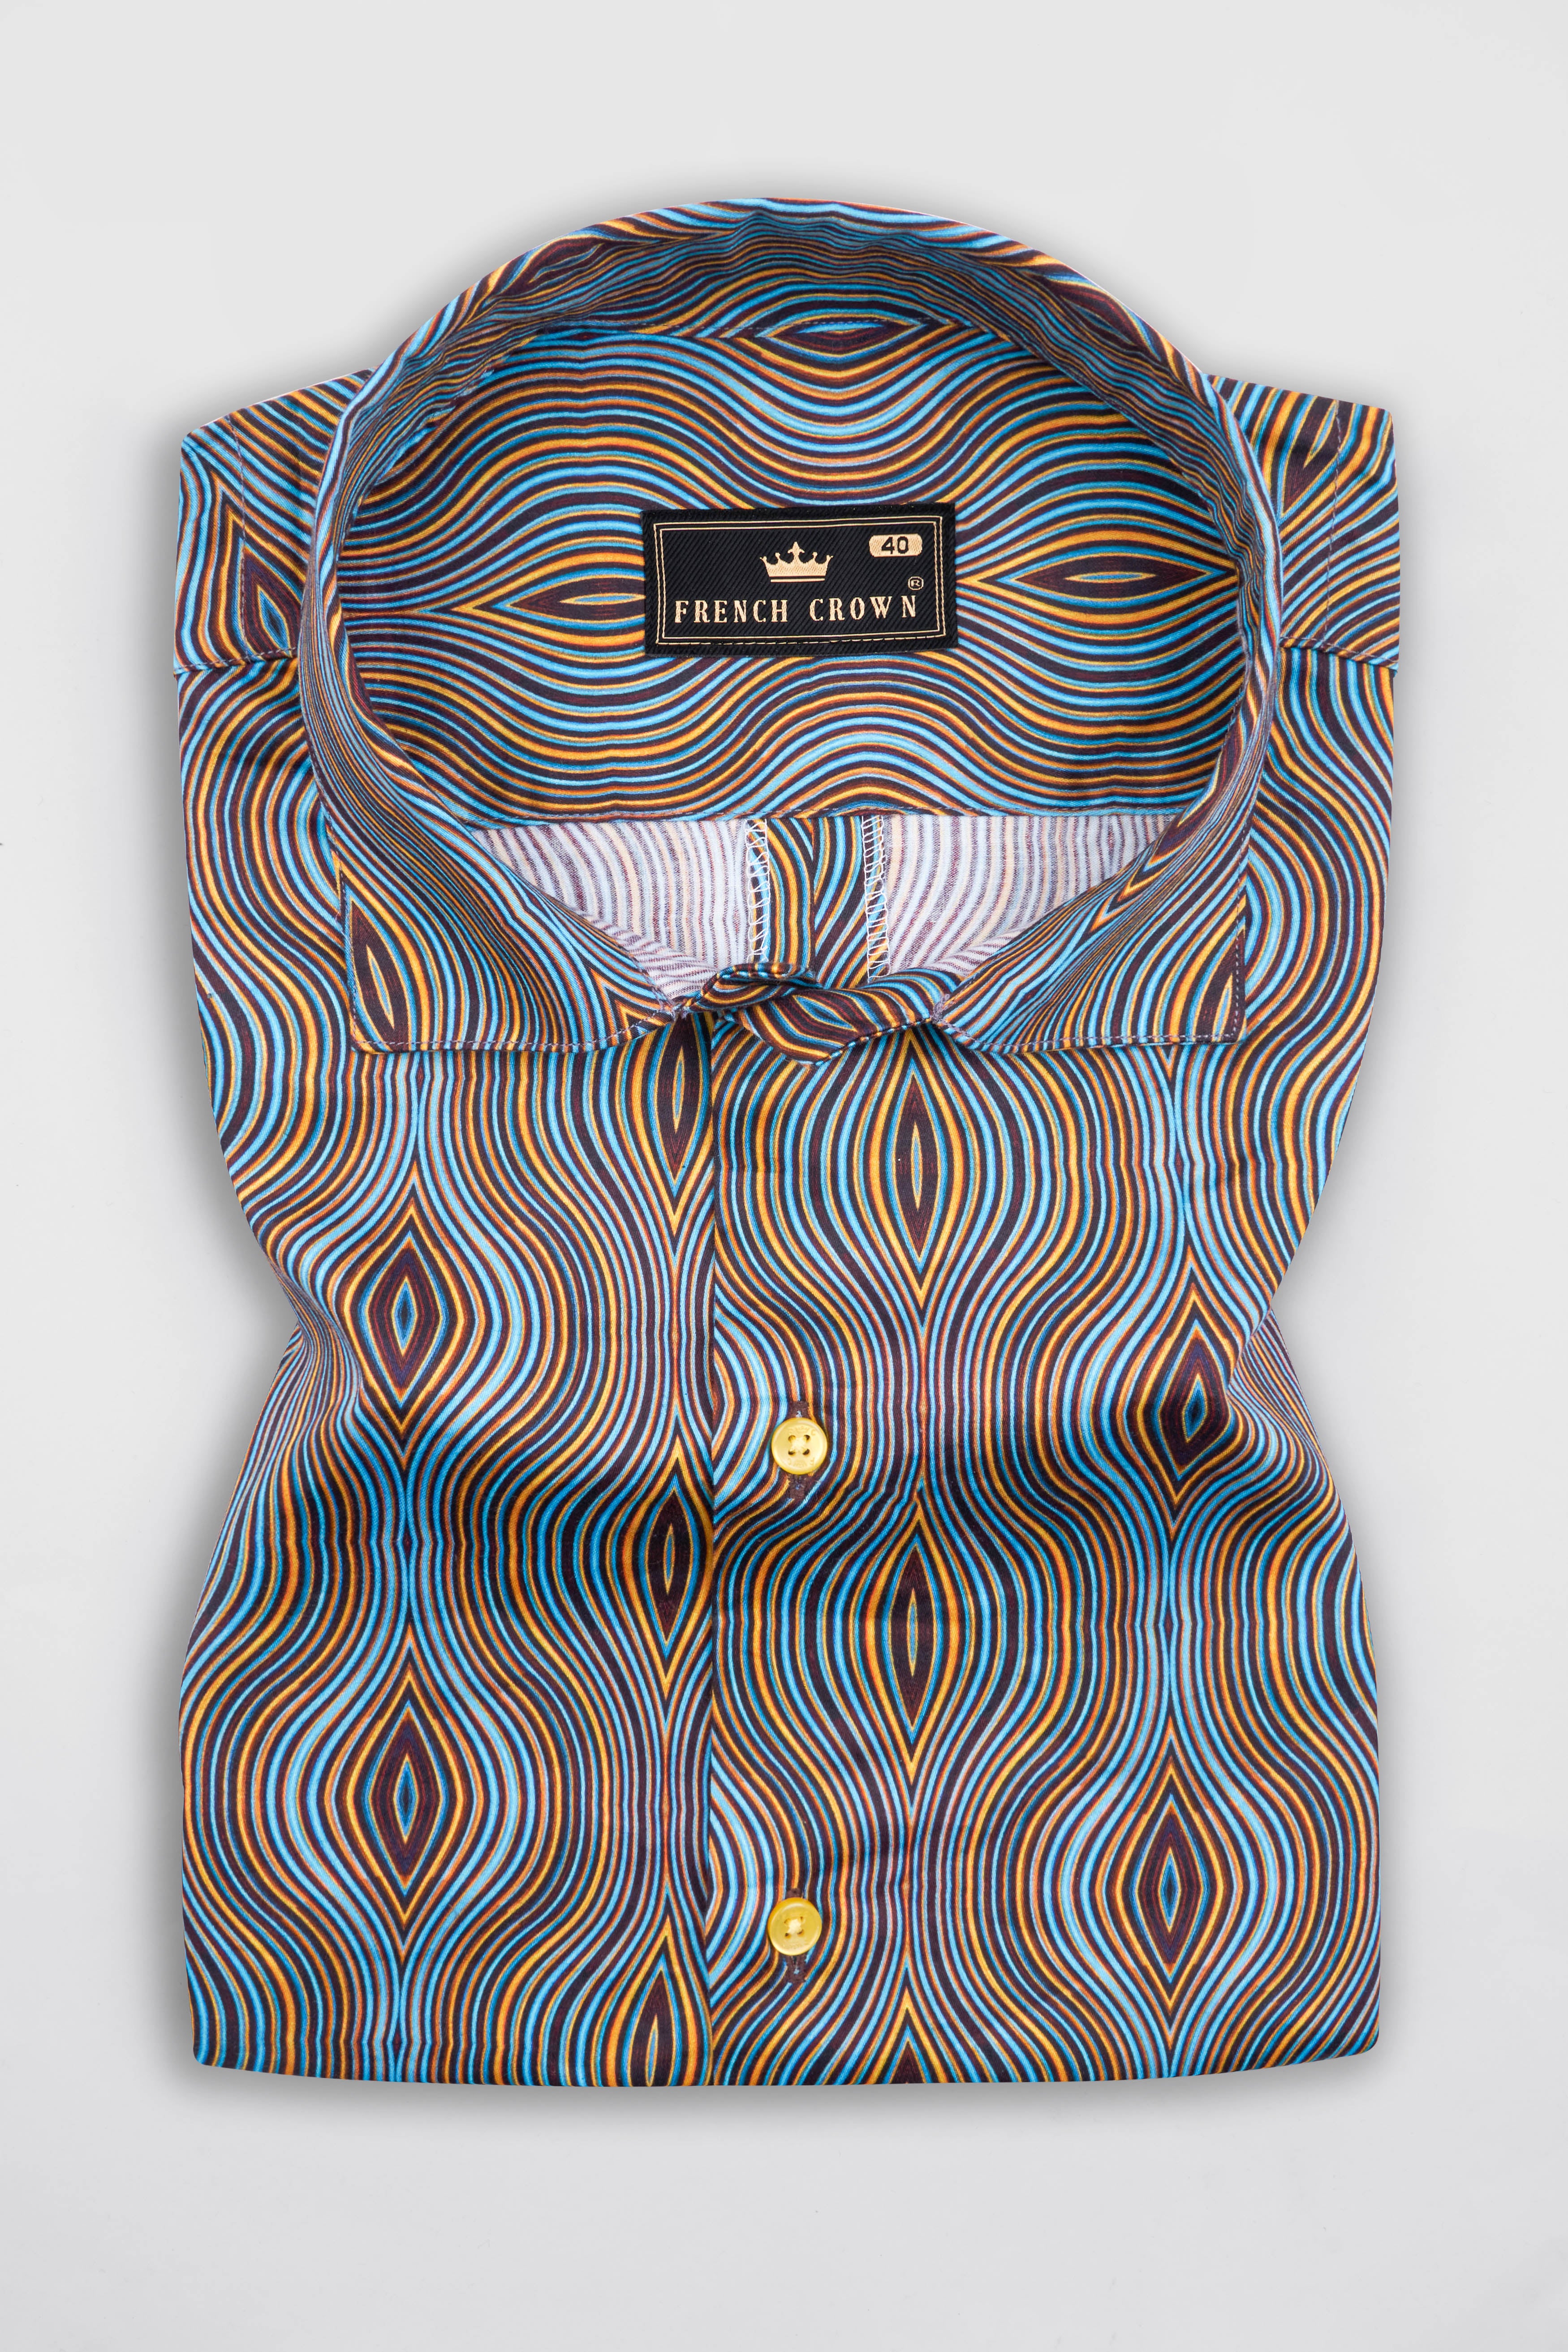 Turquoise Blue with Gorse Yellow and Cab Sav Maroon Waves Printed Super Soft Premium Cotton Shirt